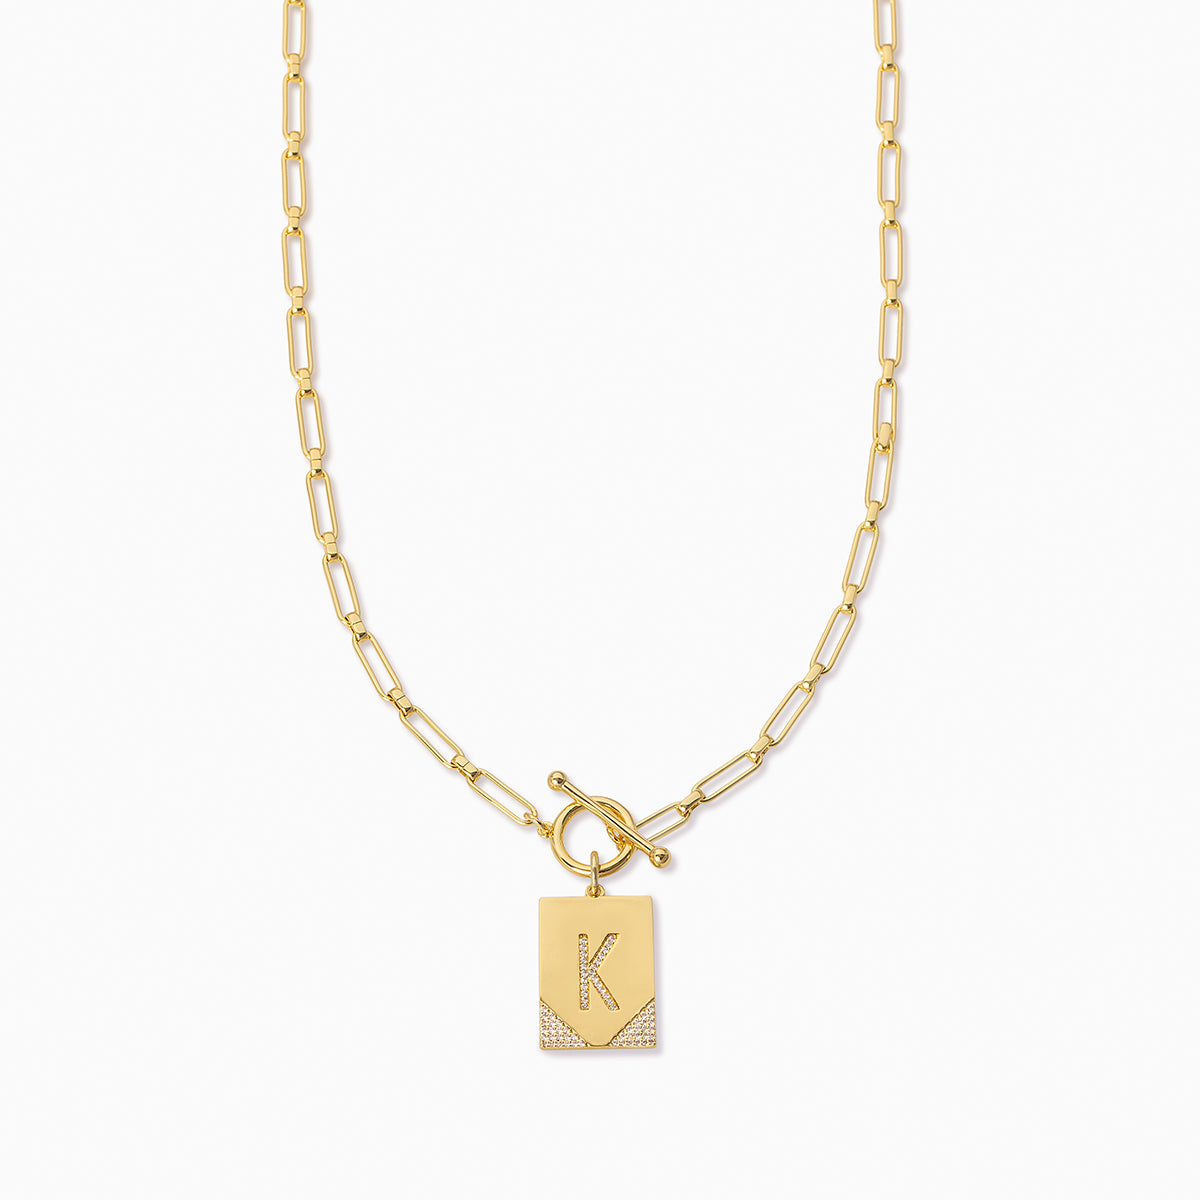 Leave Your Mark Chain Necklace | Gold  K | Product Image | Uncommon James